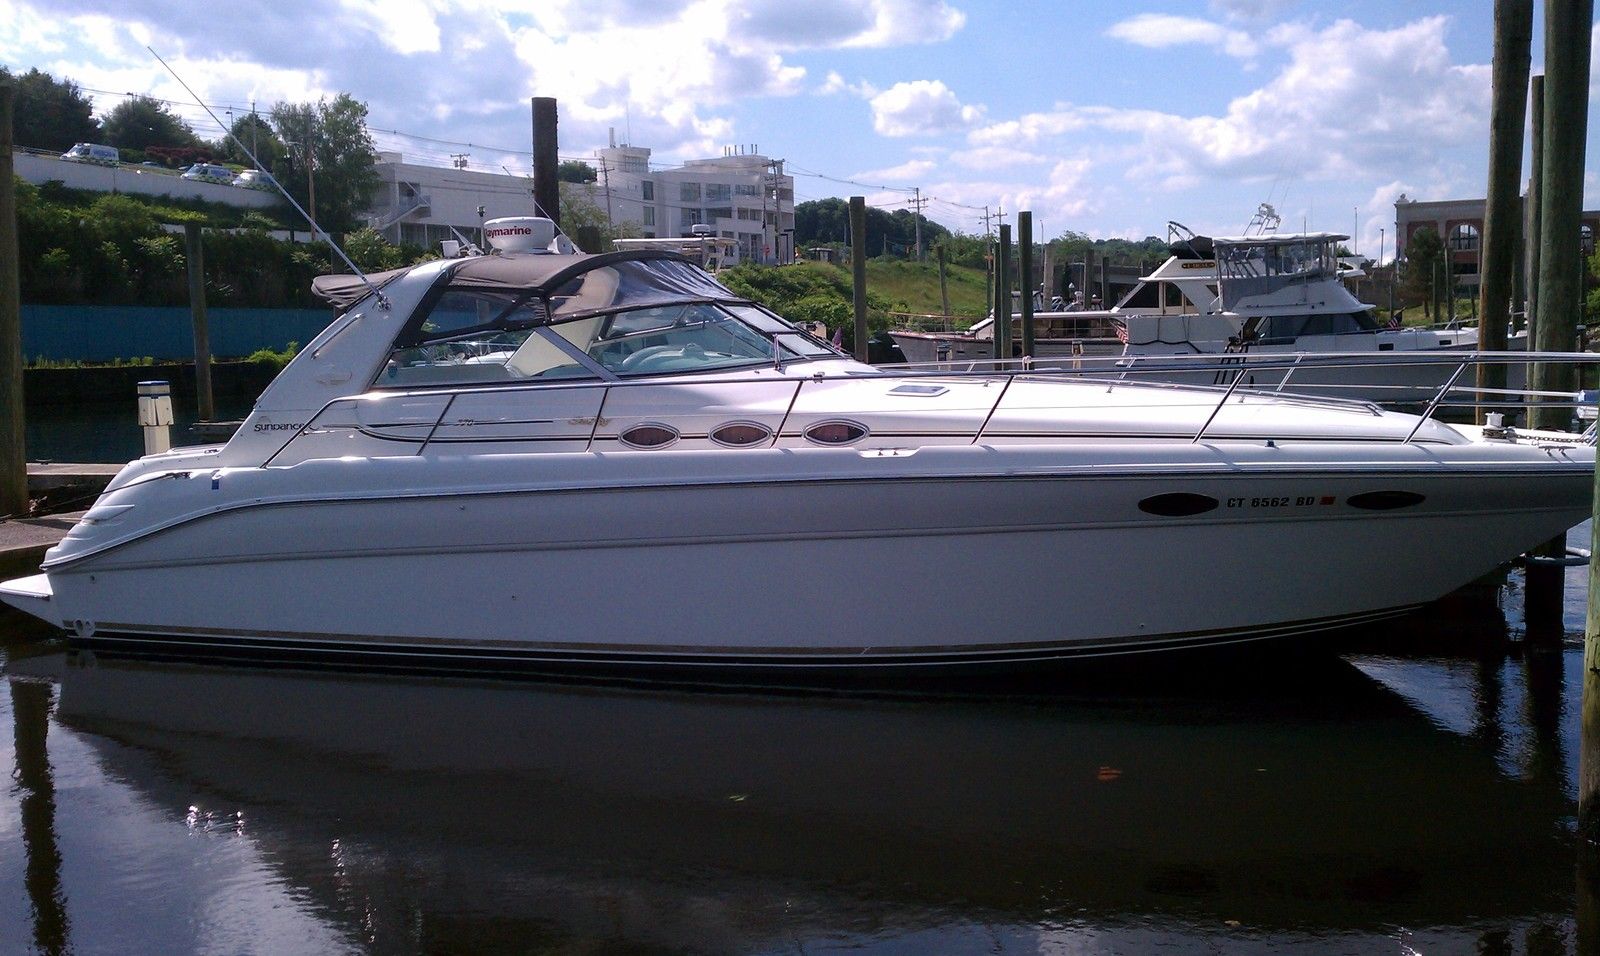 Sea Ray Sundancer 370 1995 for sale for $63,000 - Boats 